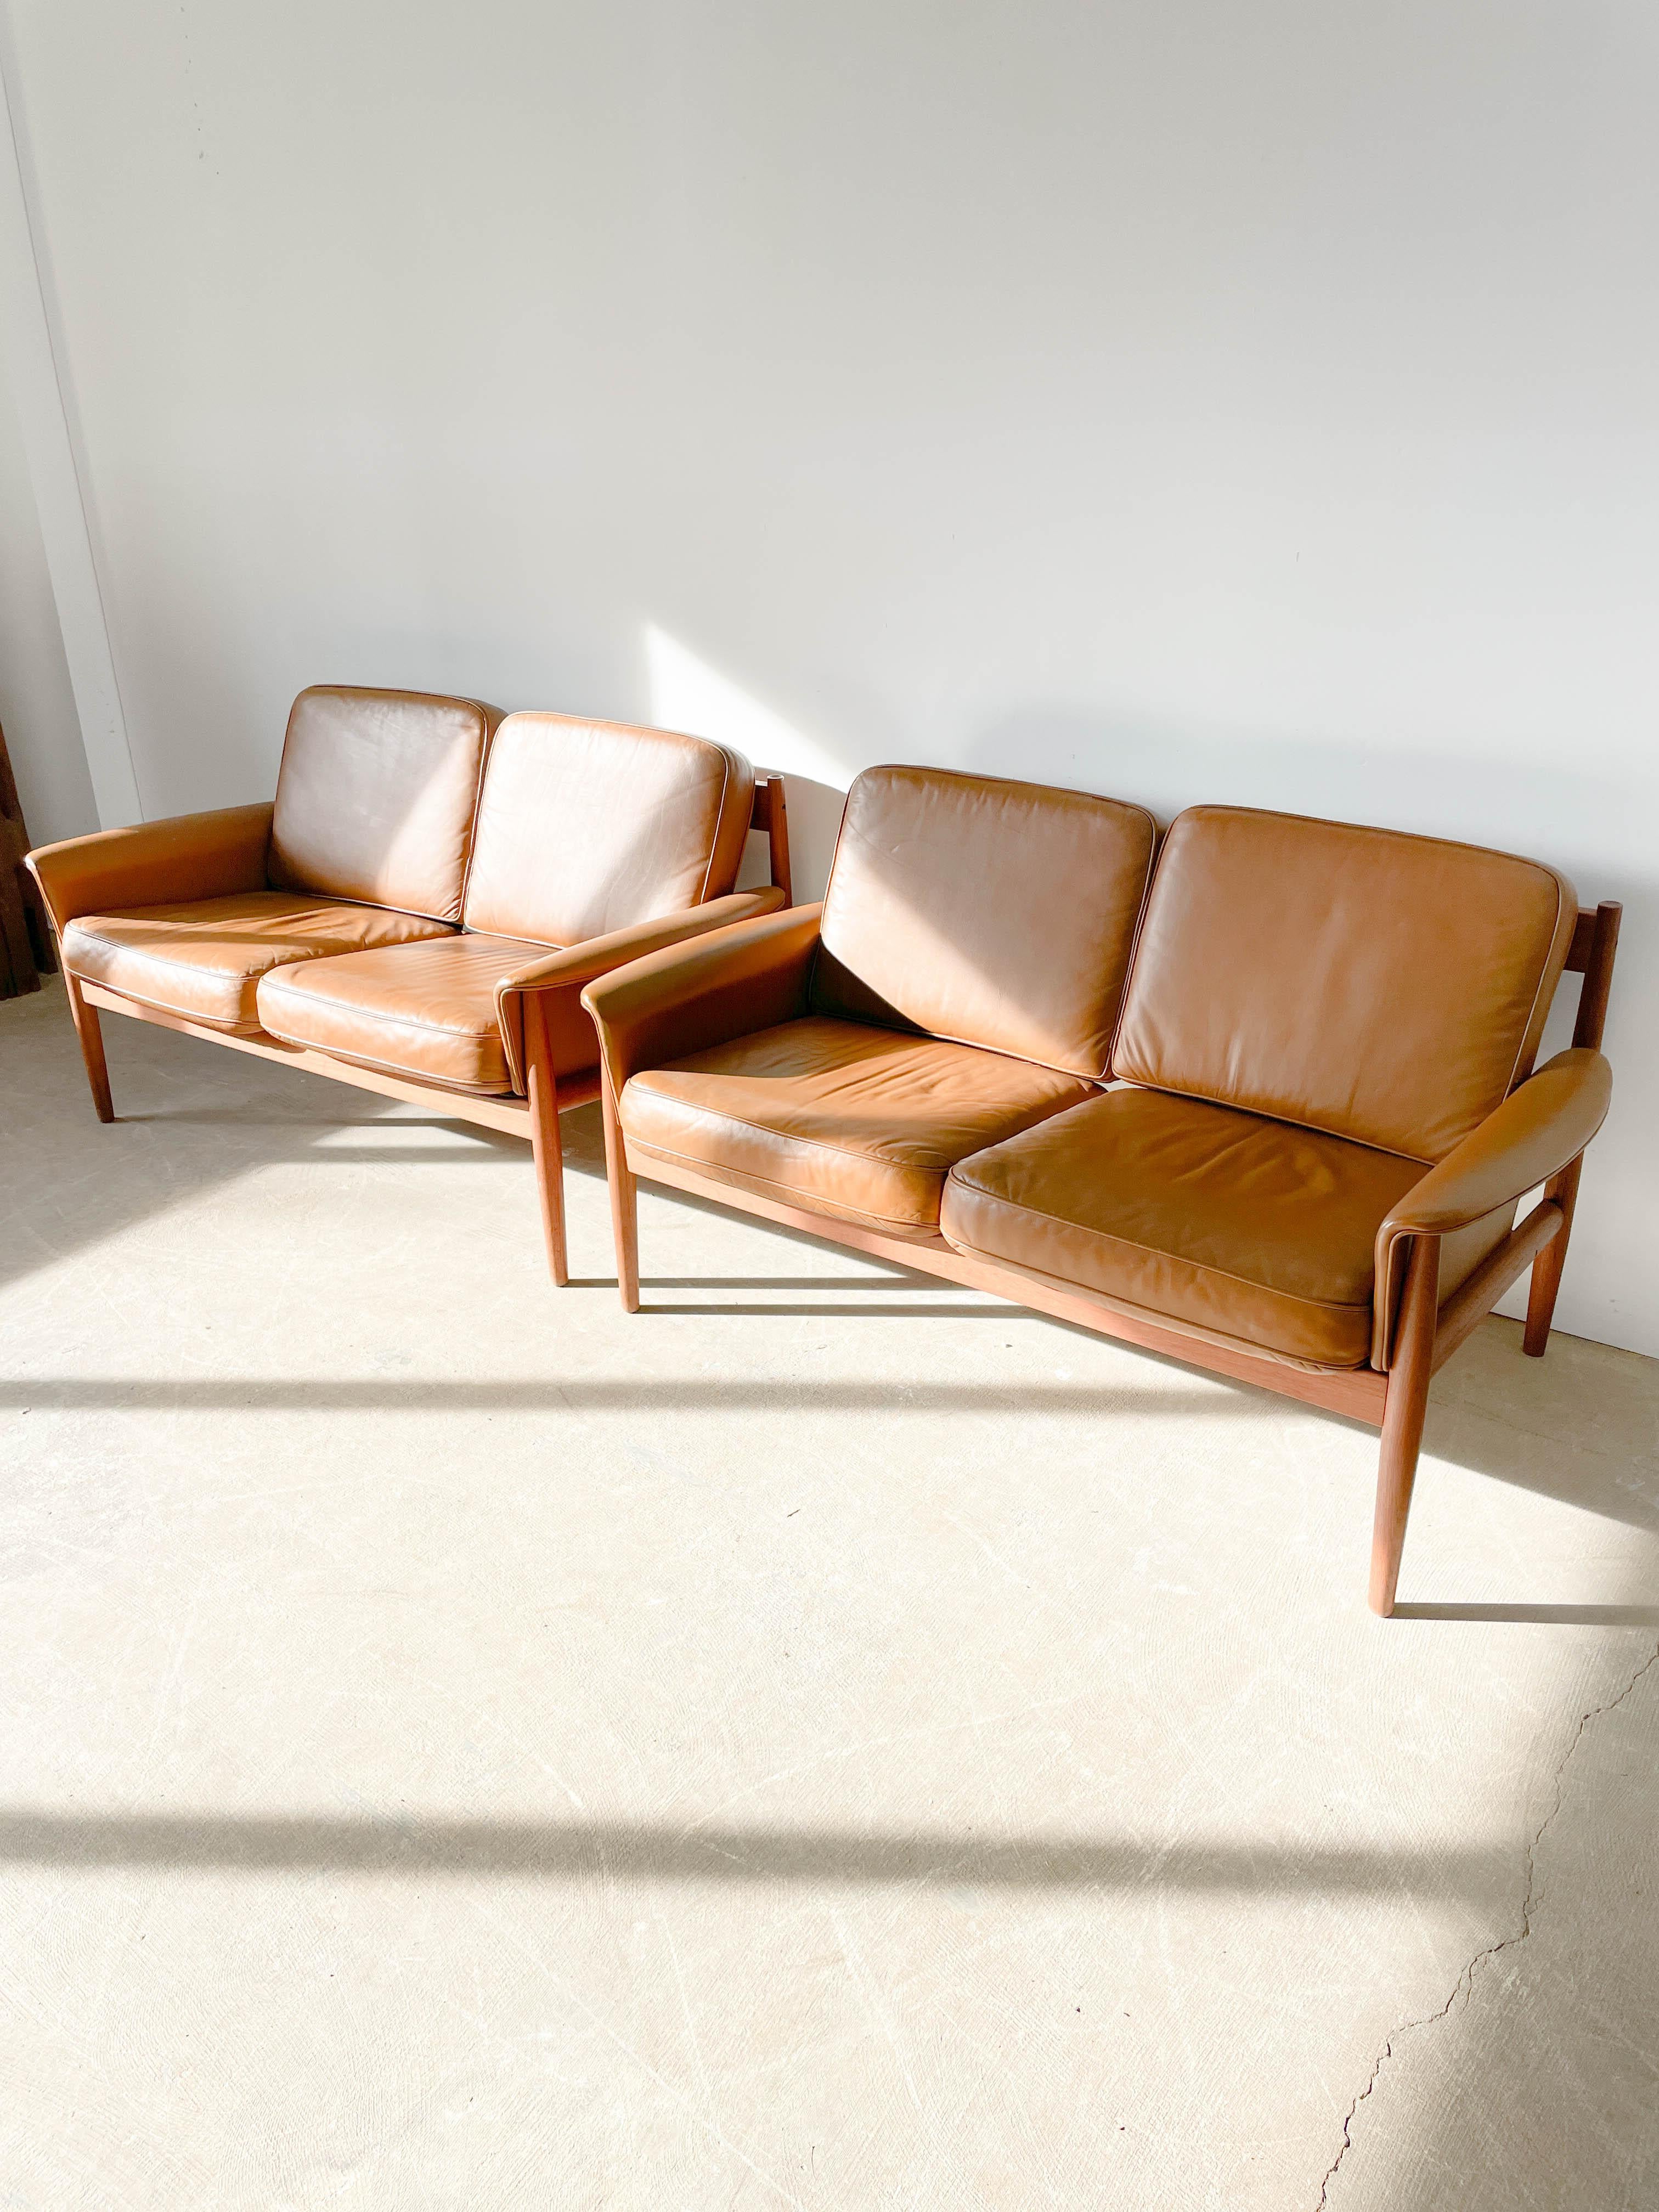 Luxurious teak frame and leather cushioned loveseats designed by Greta Jalk with Charles France for his company France and Sons in the 1950s. Gorgeous teak wood frame with elegant back staves all cleverly joined together and upholstered in a warm